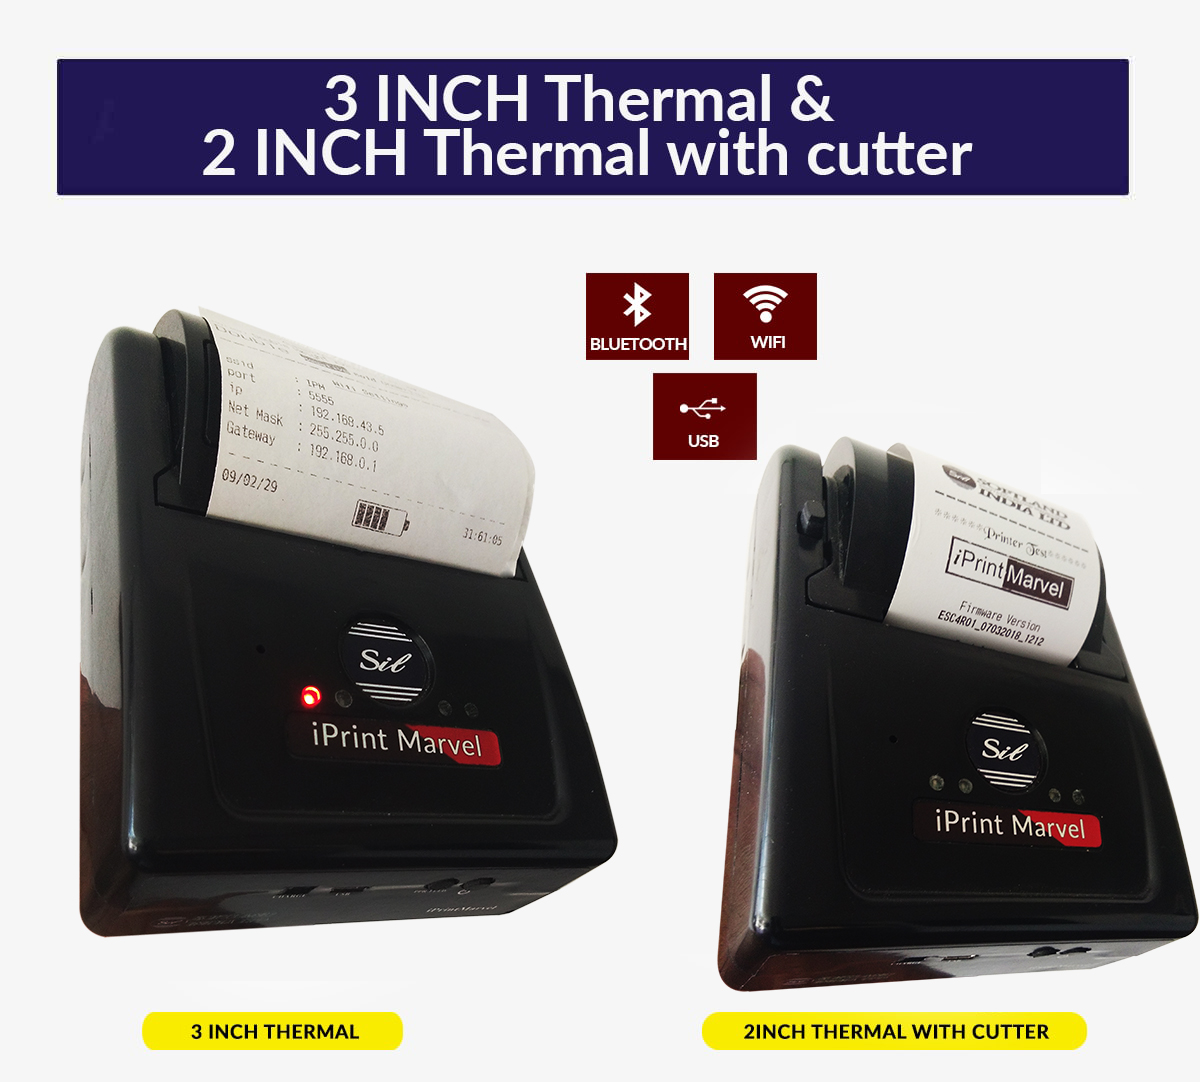 3 INCH Thermal & 2INCH Thermal With Cutter